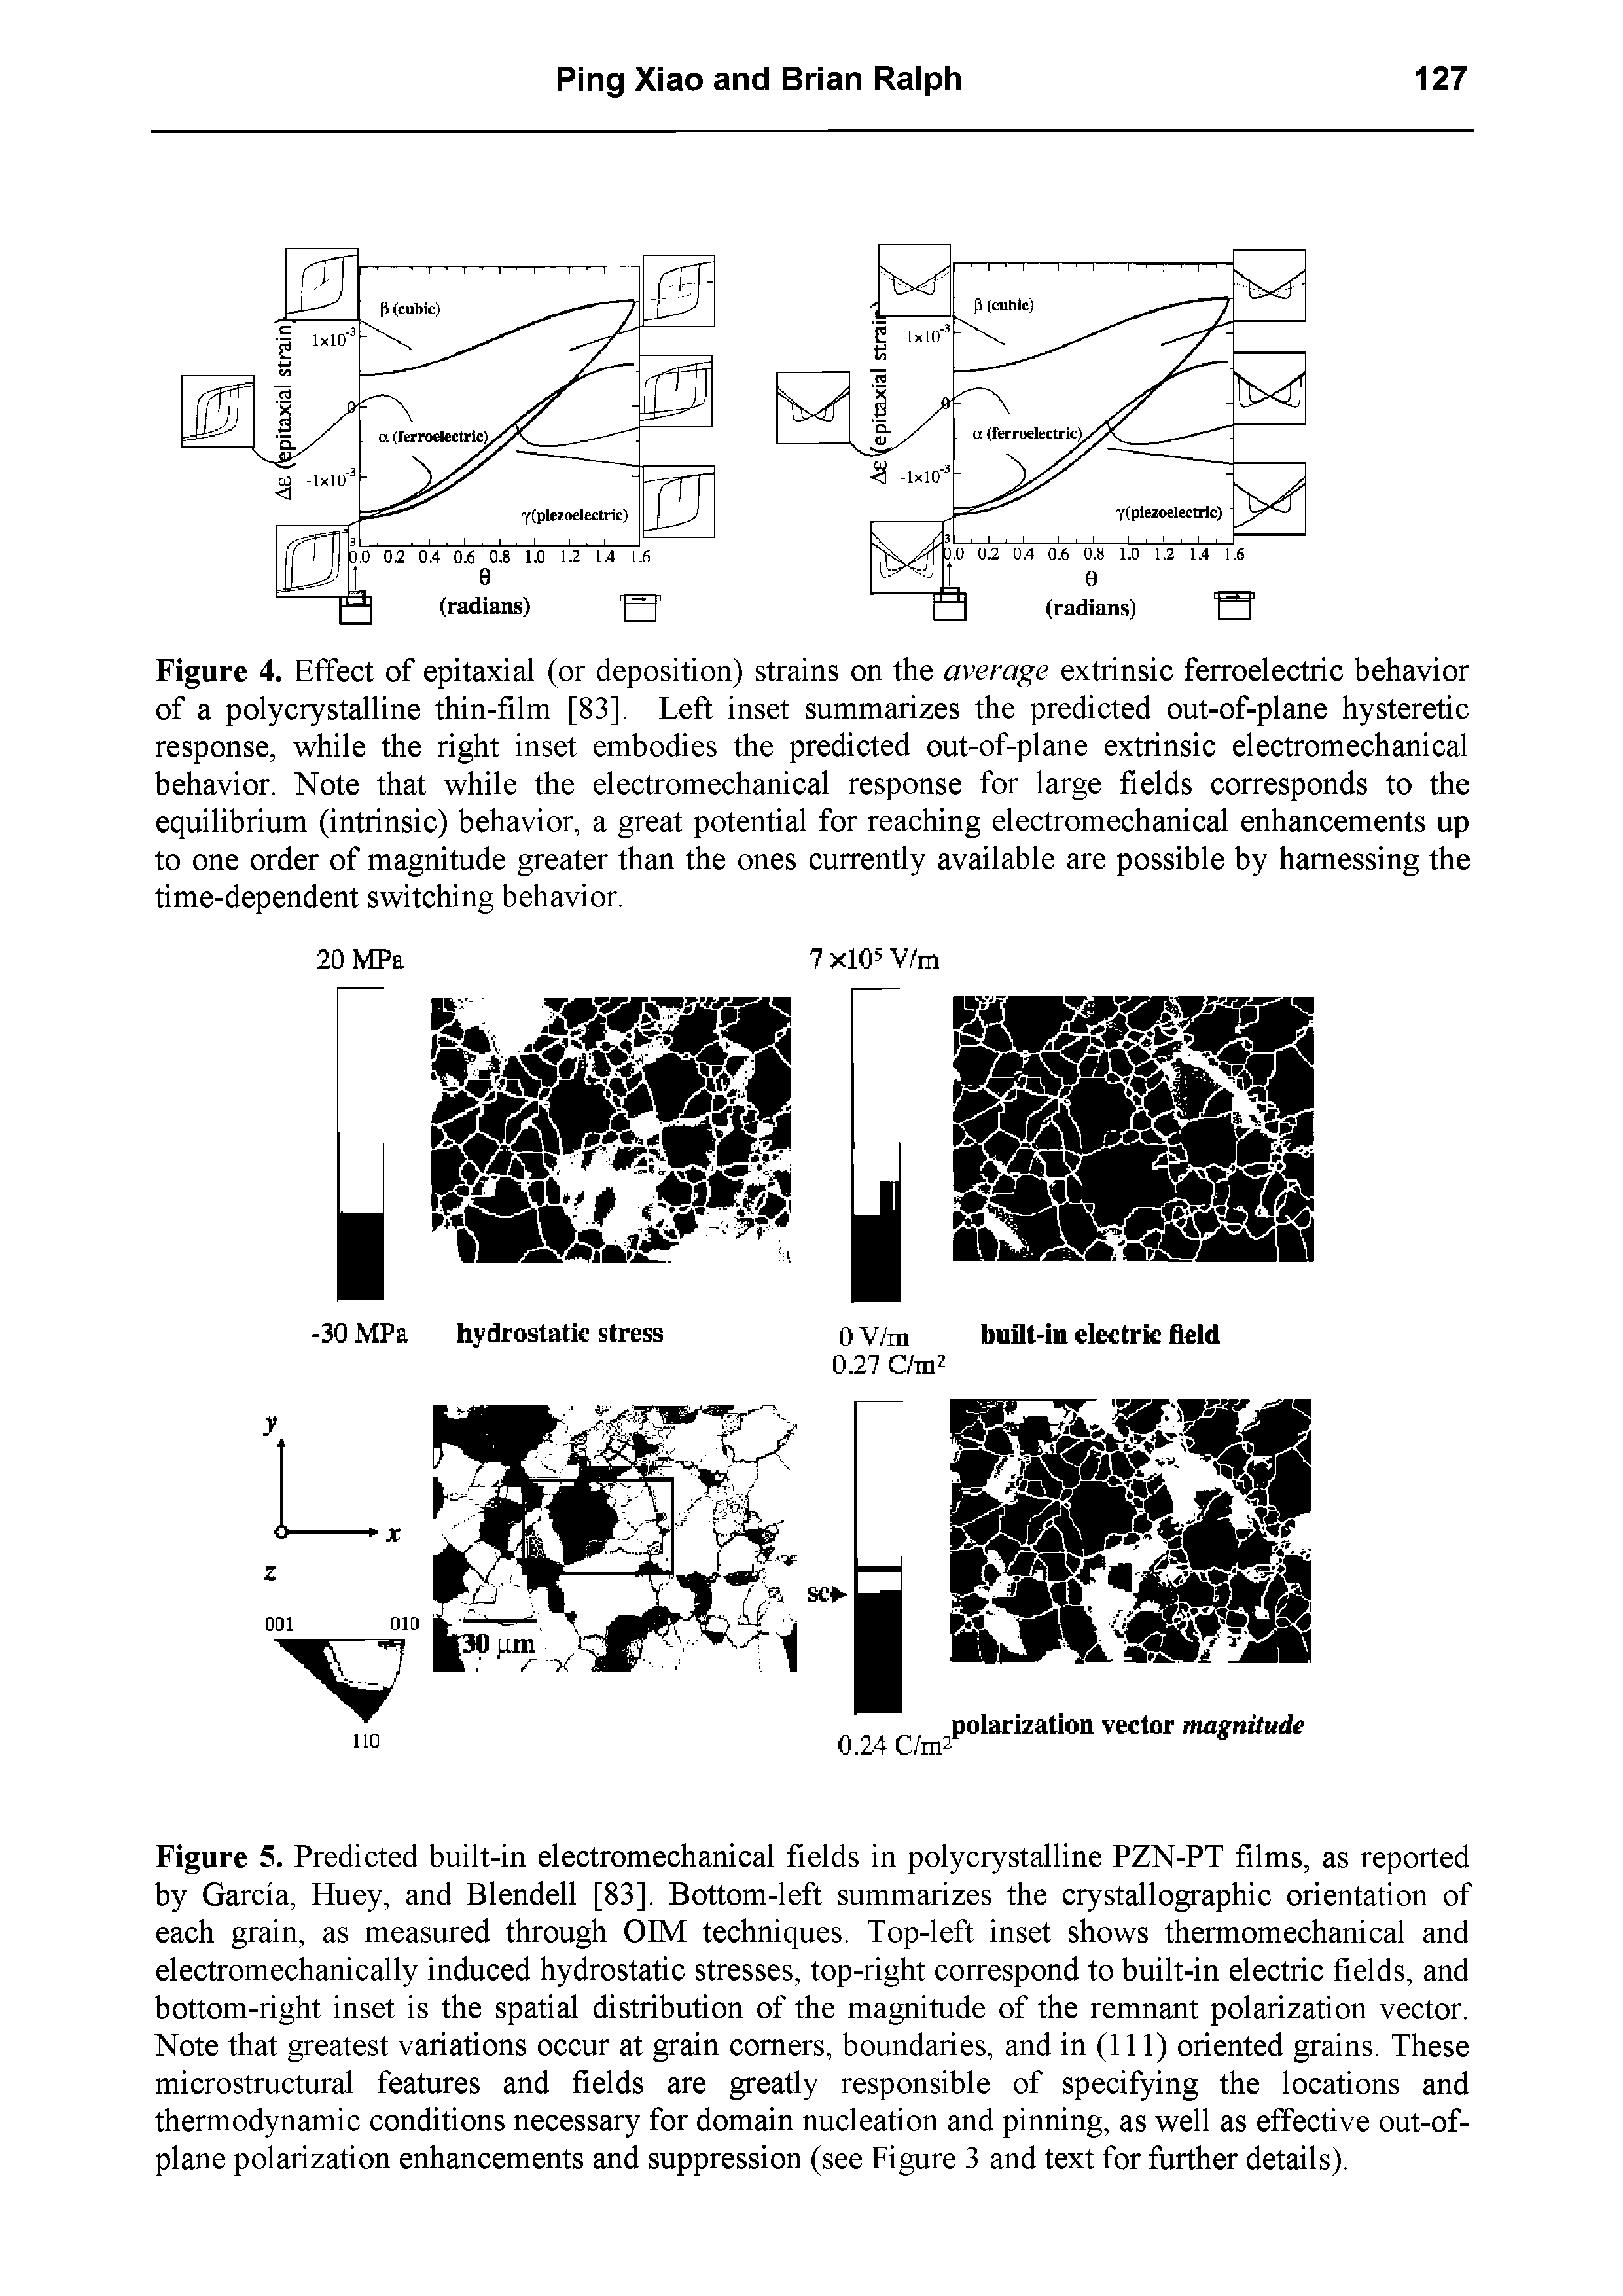 Figure 4. Effect of epitaxial (or deposition) strains on the average extrinsic ferroelectric behavior of a polycrystalline thin-film [83], Left inset summarizes the predicted out-of-plane hysteretic response, while the right inset embodies the predicted out-of-plane extrinsic electromechanical behavior. Note that while the electromechanical response for large fields corresponds to the equilibrium (intrinsic) behavior, a great potential for reaching electromechanical enhancements up to one order of magnitude greater than the ones currently available are possible by harnessing the time-dependent switching behavior.